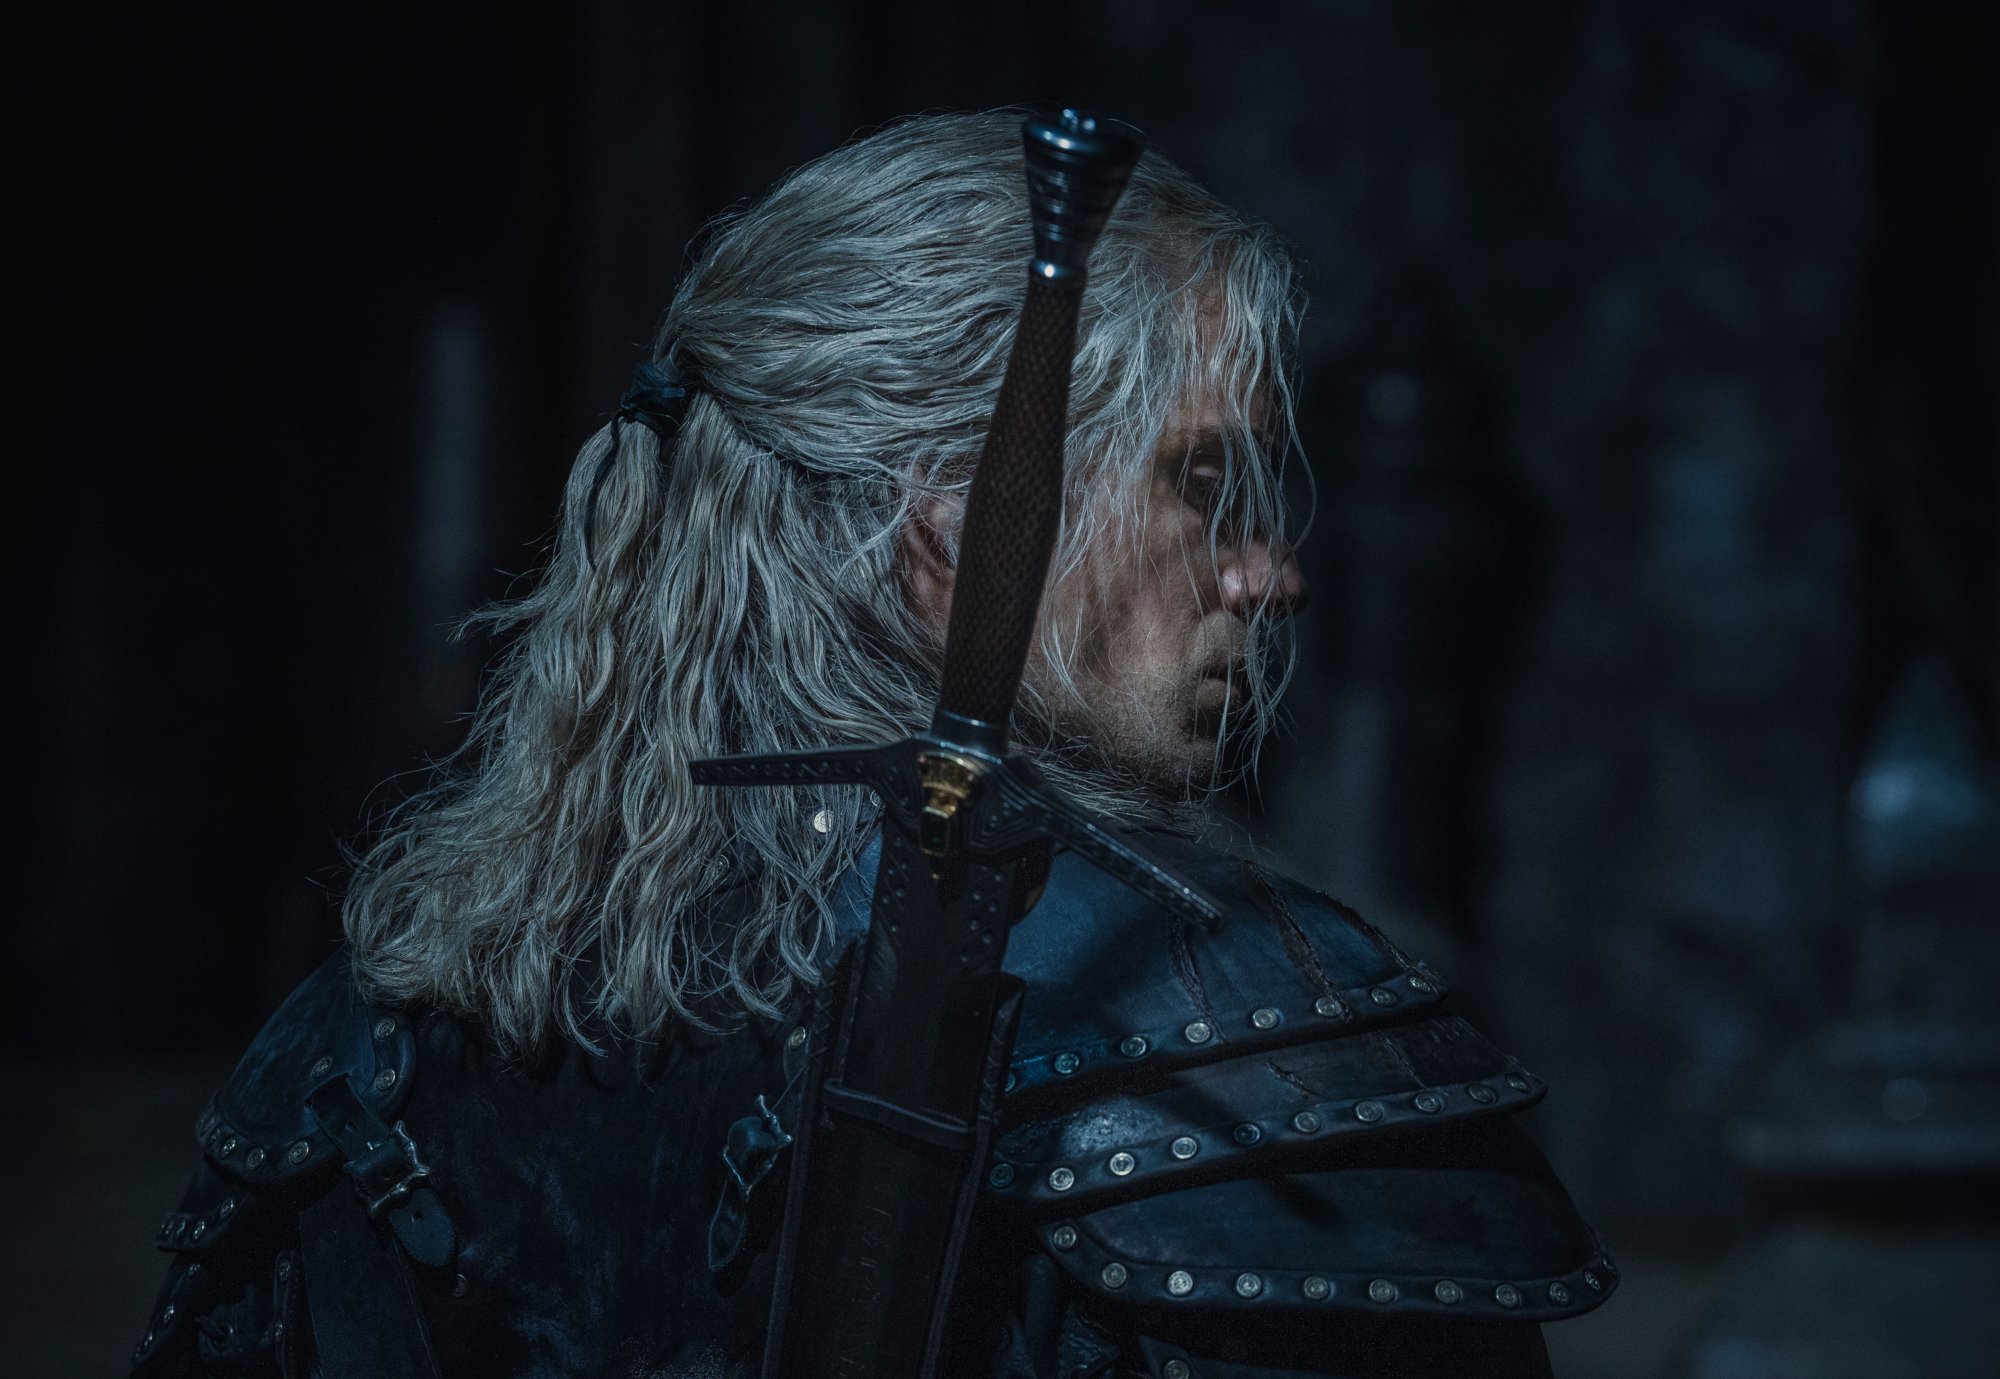 Henry Cavill as Geralt of Rivia in 'The Witcher,' which Netflix renewed for season 3 ahead of season 2. He's wearing black leather, his blonde hair is half-up, and he's turned away from the camera. In 'The Witcher' Season 3, he'll fight a Bruxa.